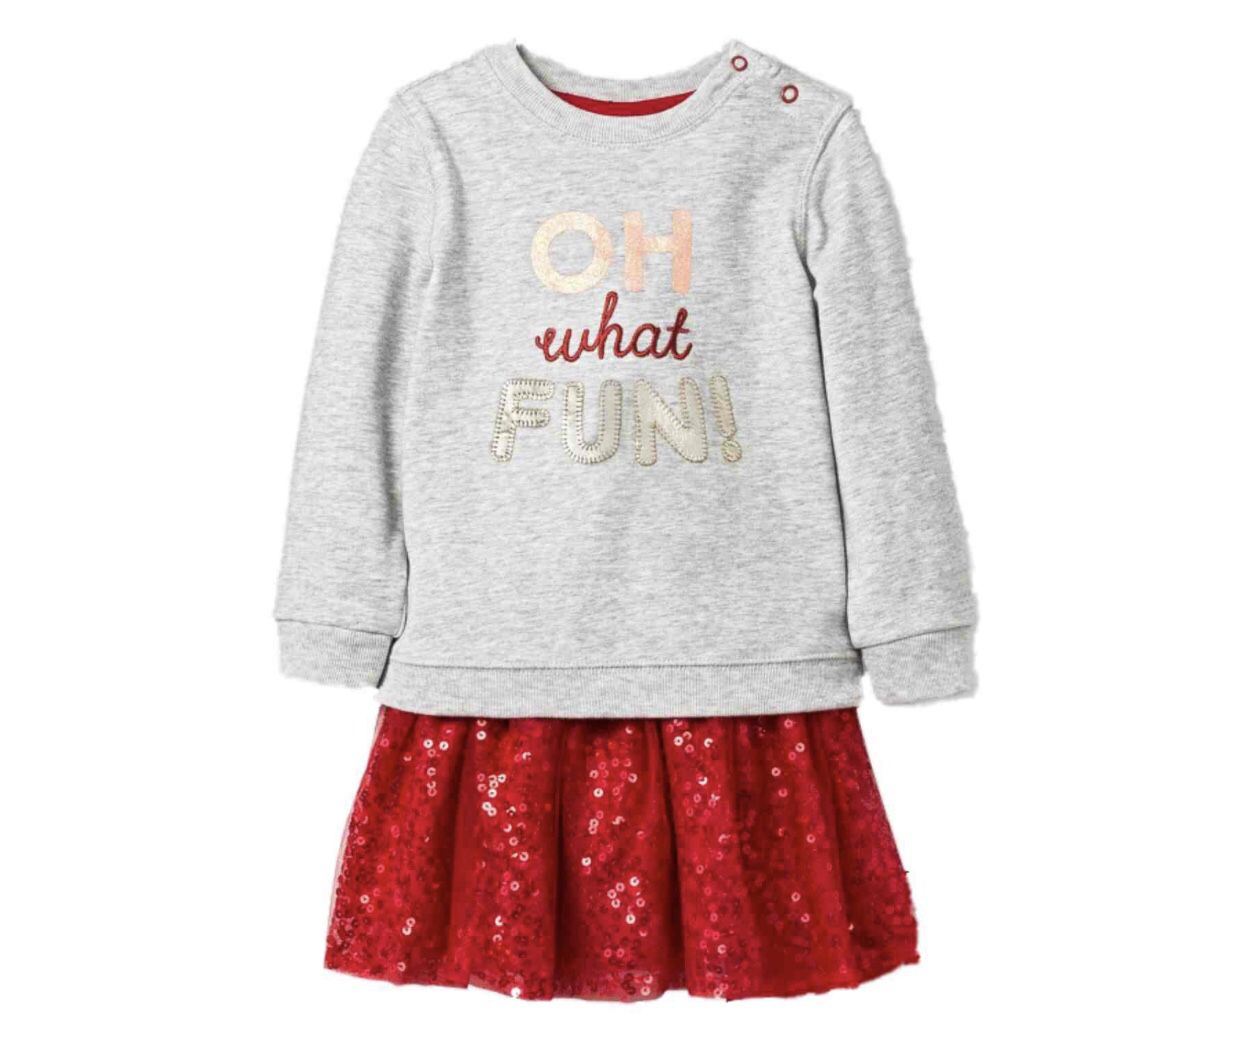 New! Cat & Jack 3PC Holiday Outfit *NB 